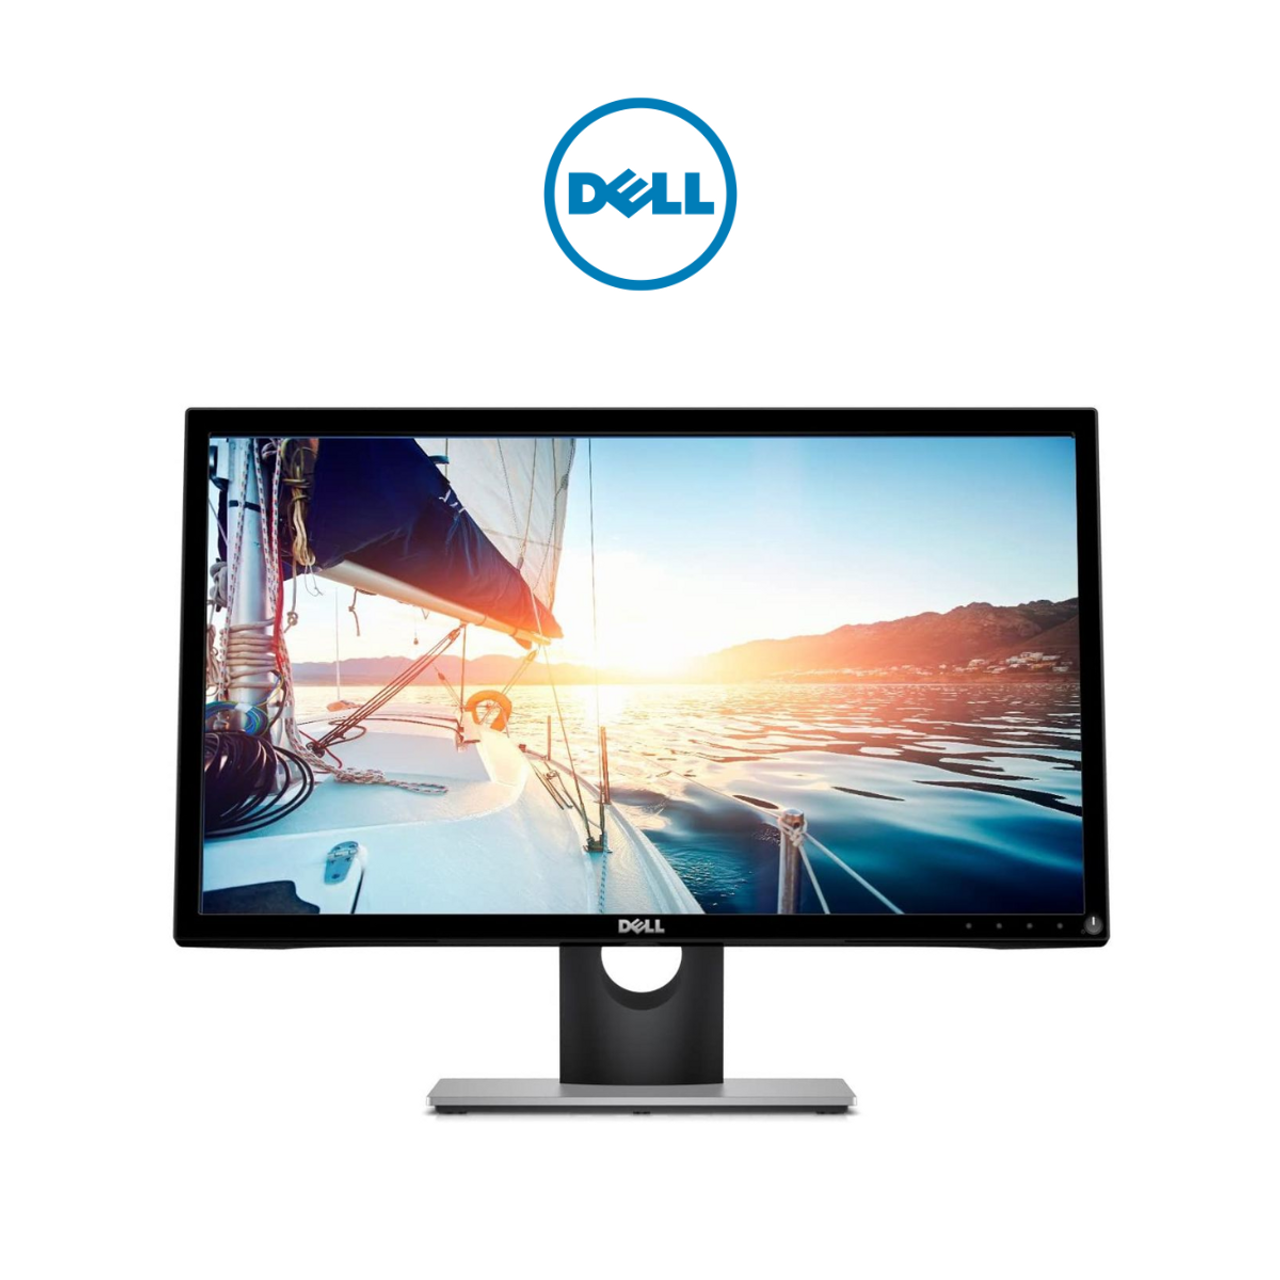 Dell 23.6" FHD 2MS 60Hz LCD Gaming Monitor product image